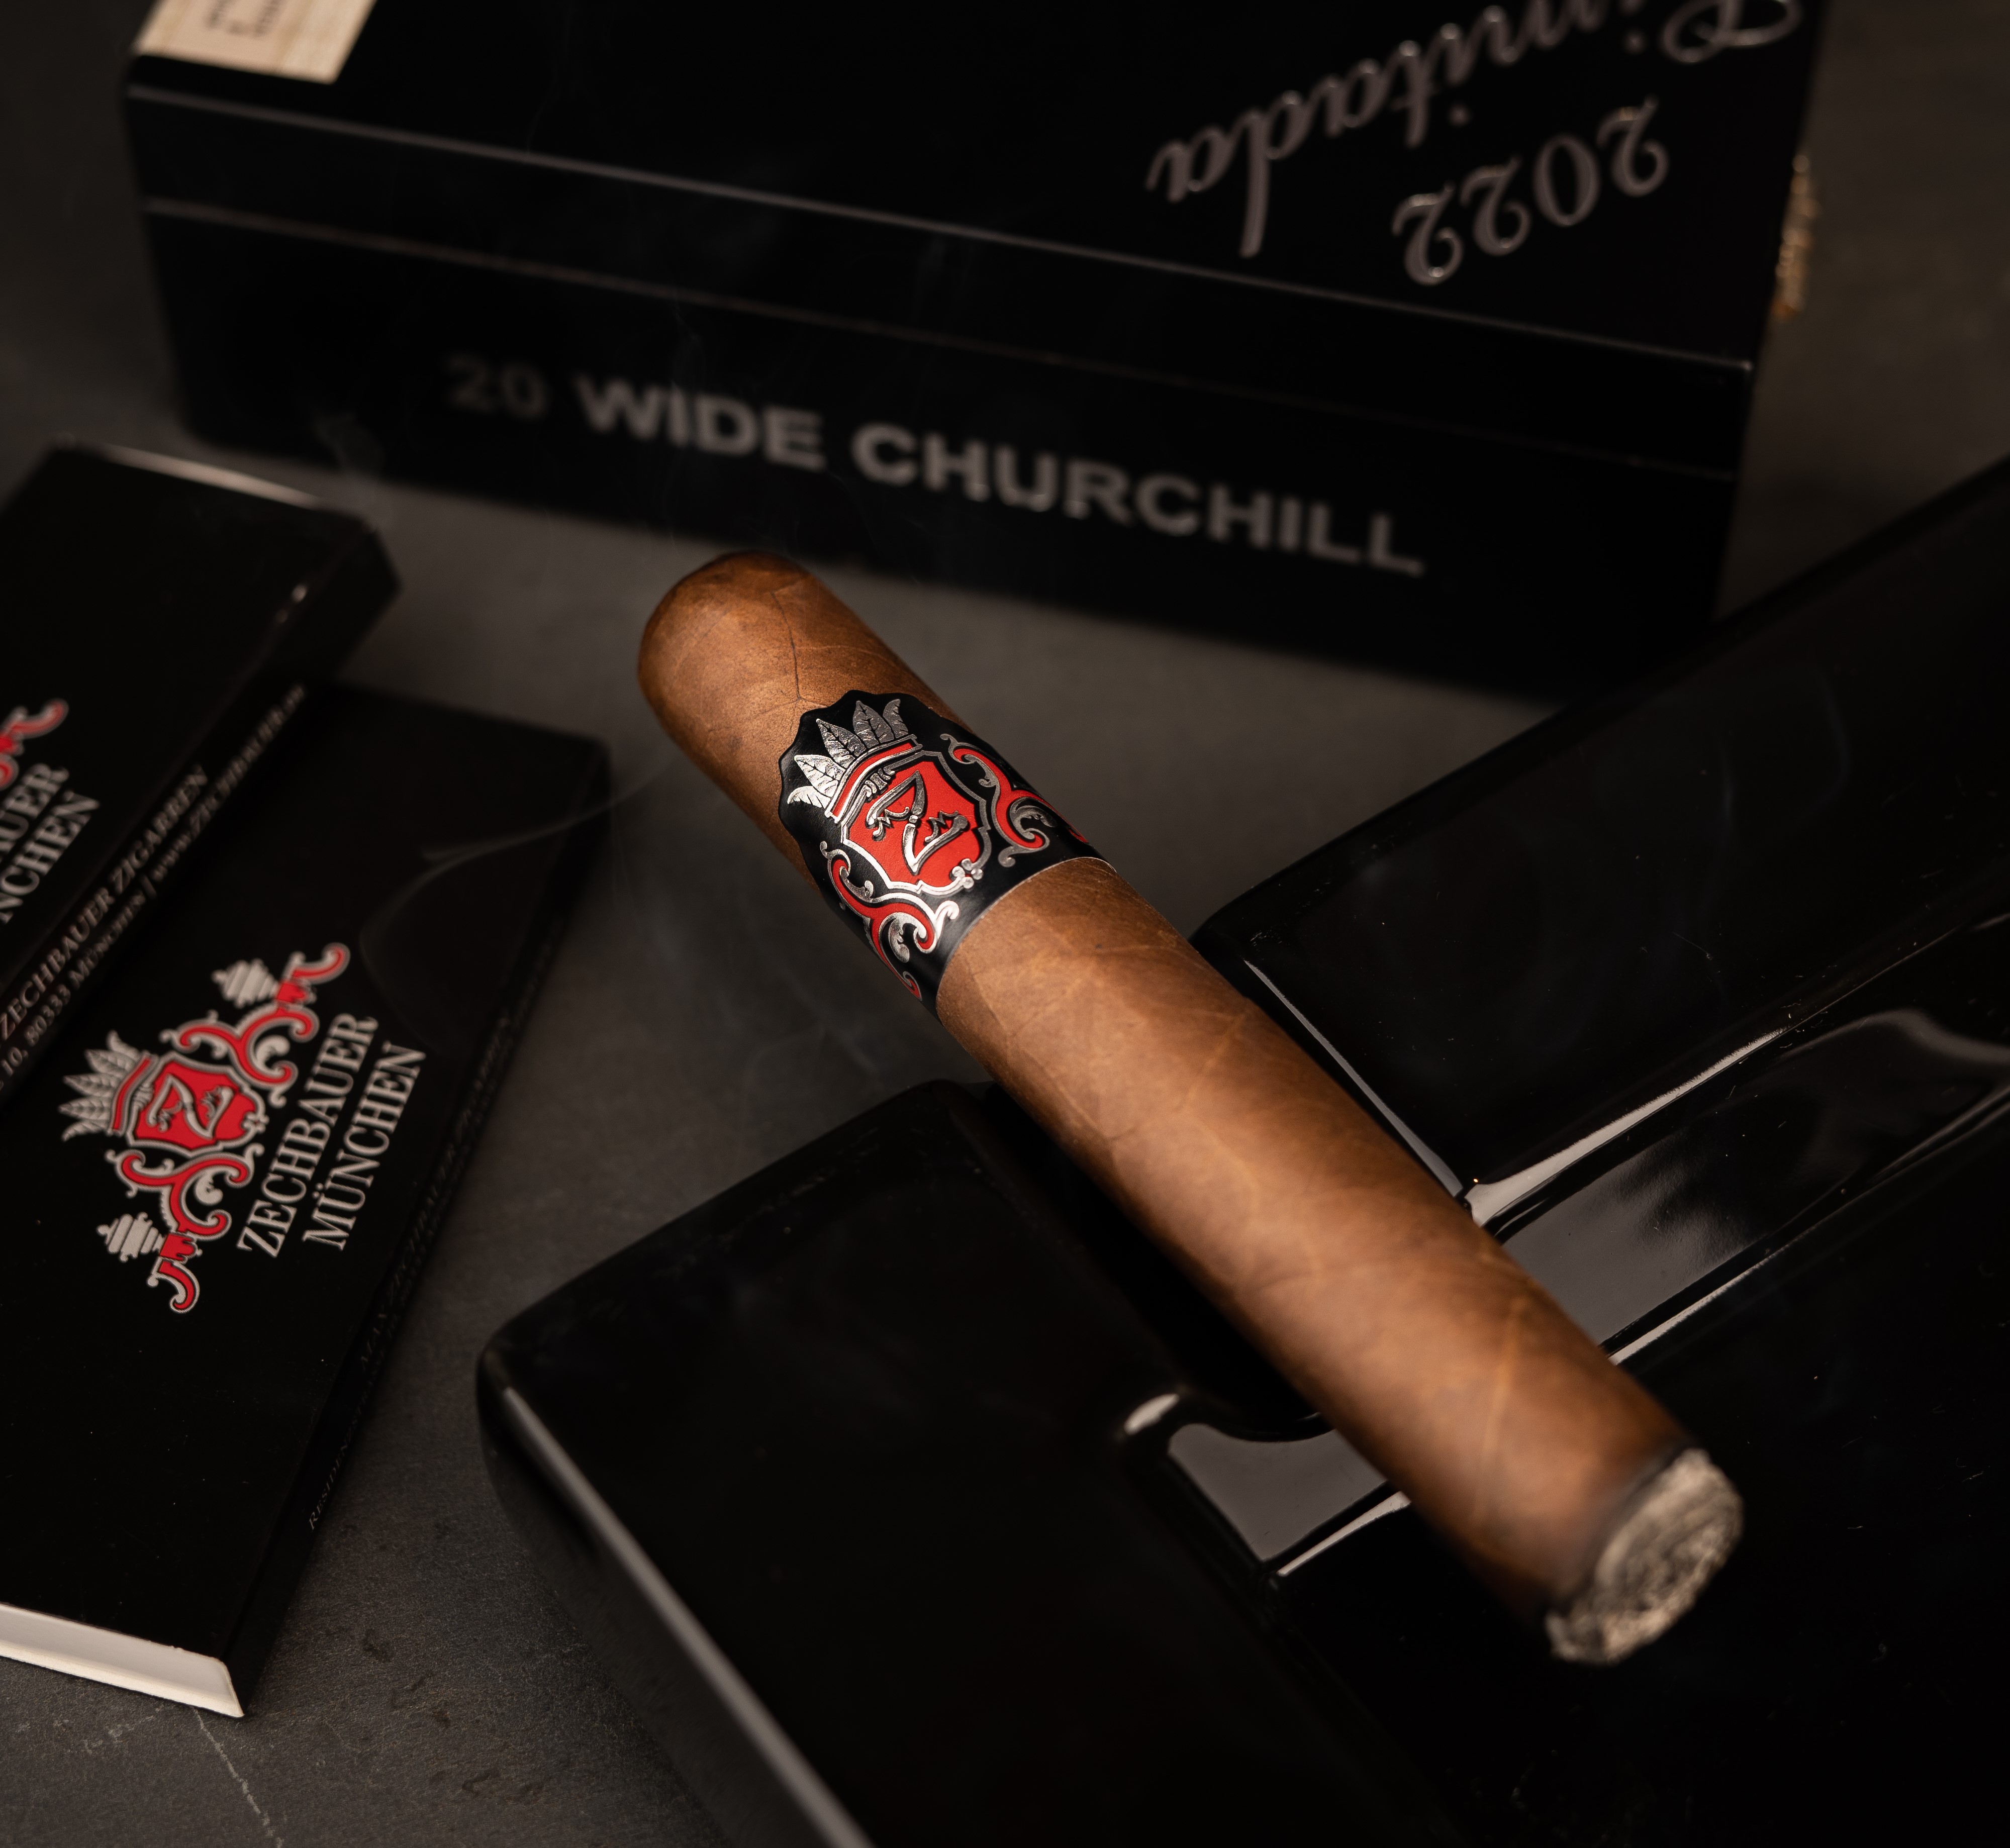 Zechbauer Royales Wide Churchill Limited Edition 2022